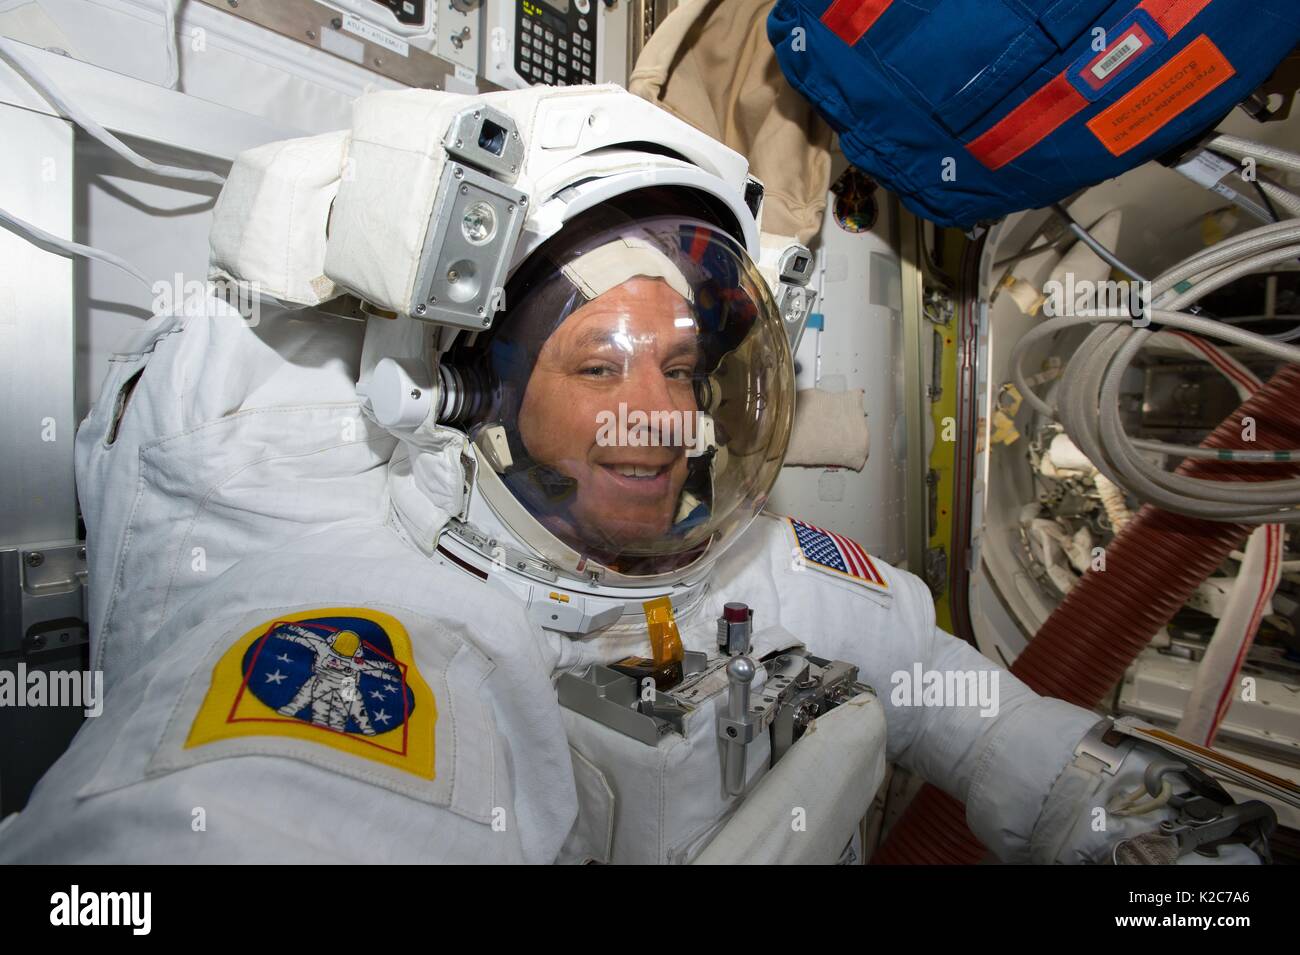 NASA International Space Station Expedition 51 prime crew member American astronaut Jack Fischer suits up in a spacesuit in preparation for an EVA spacewalk in the ISS Quest airlock May 23, 2017 in Earth orbit. Stock Photo